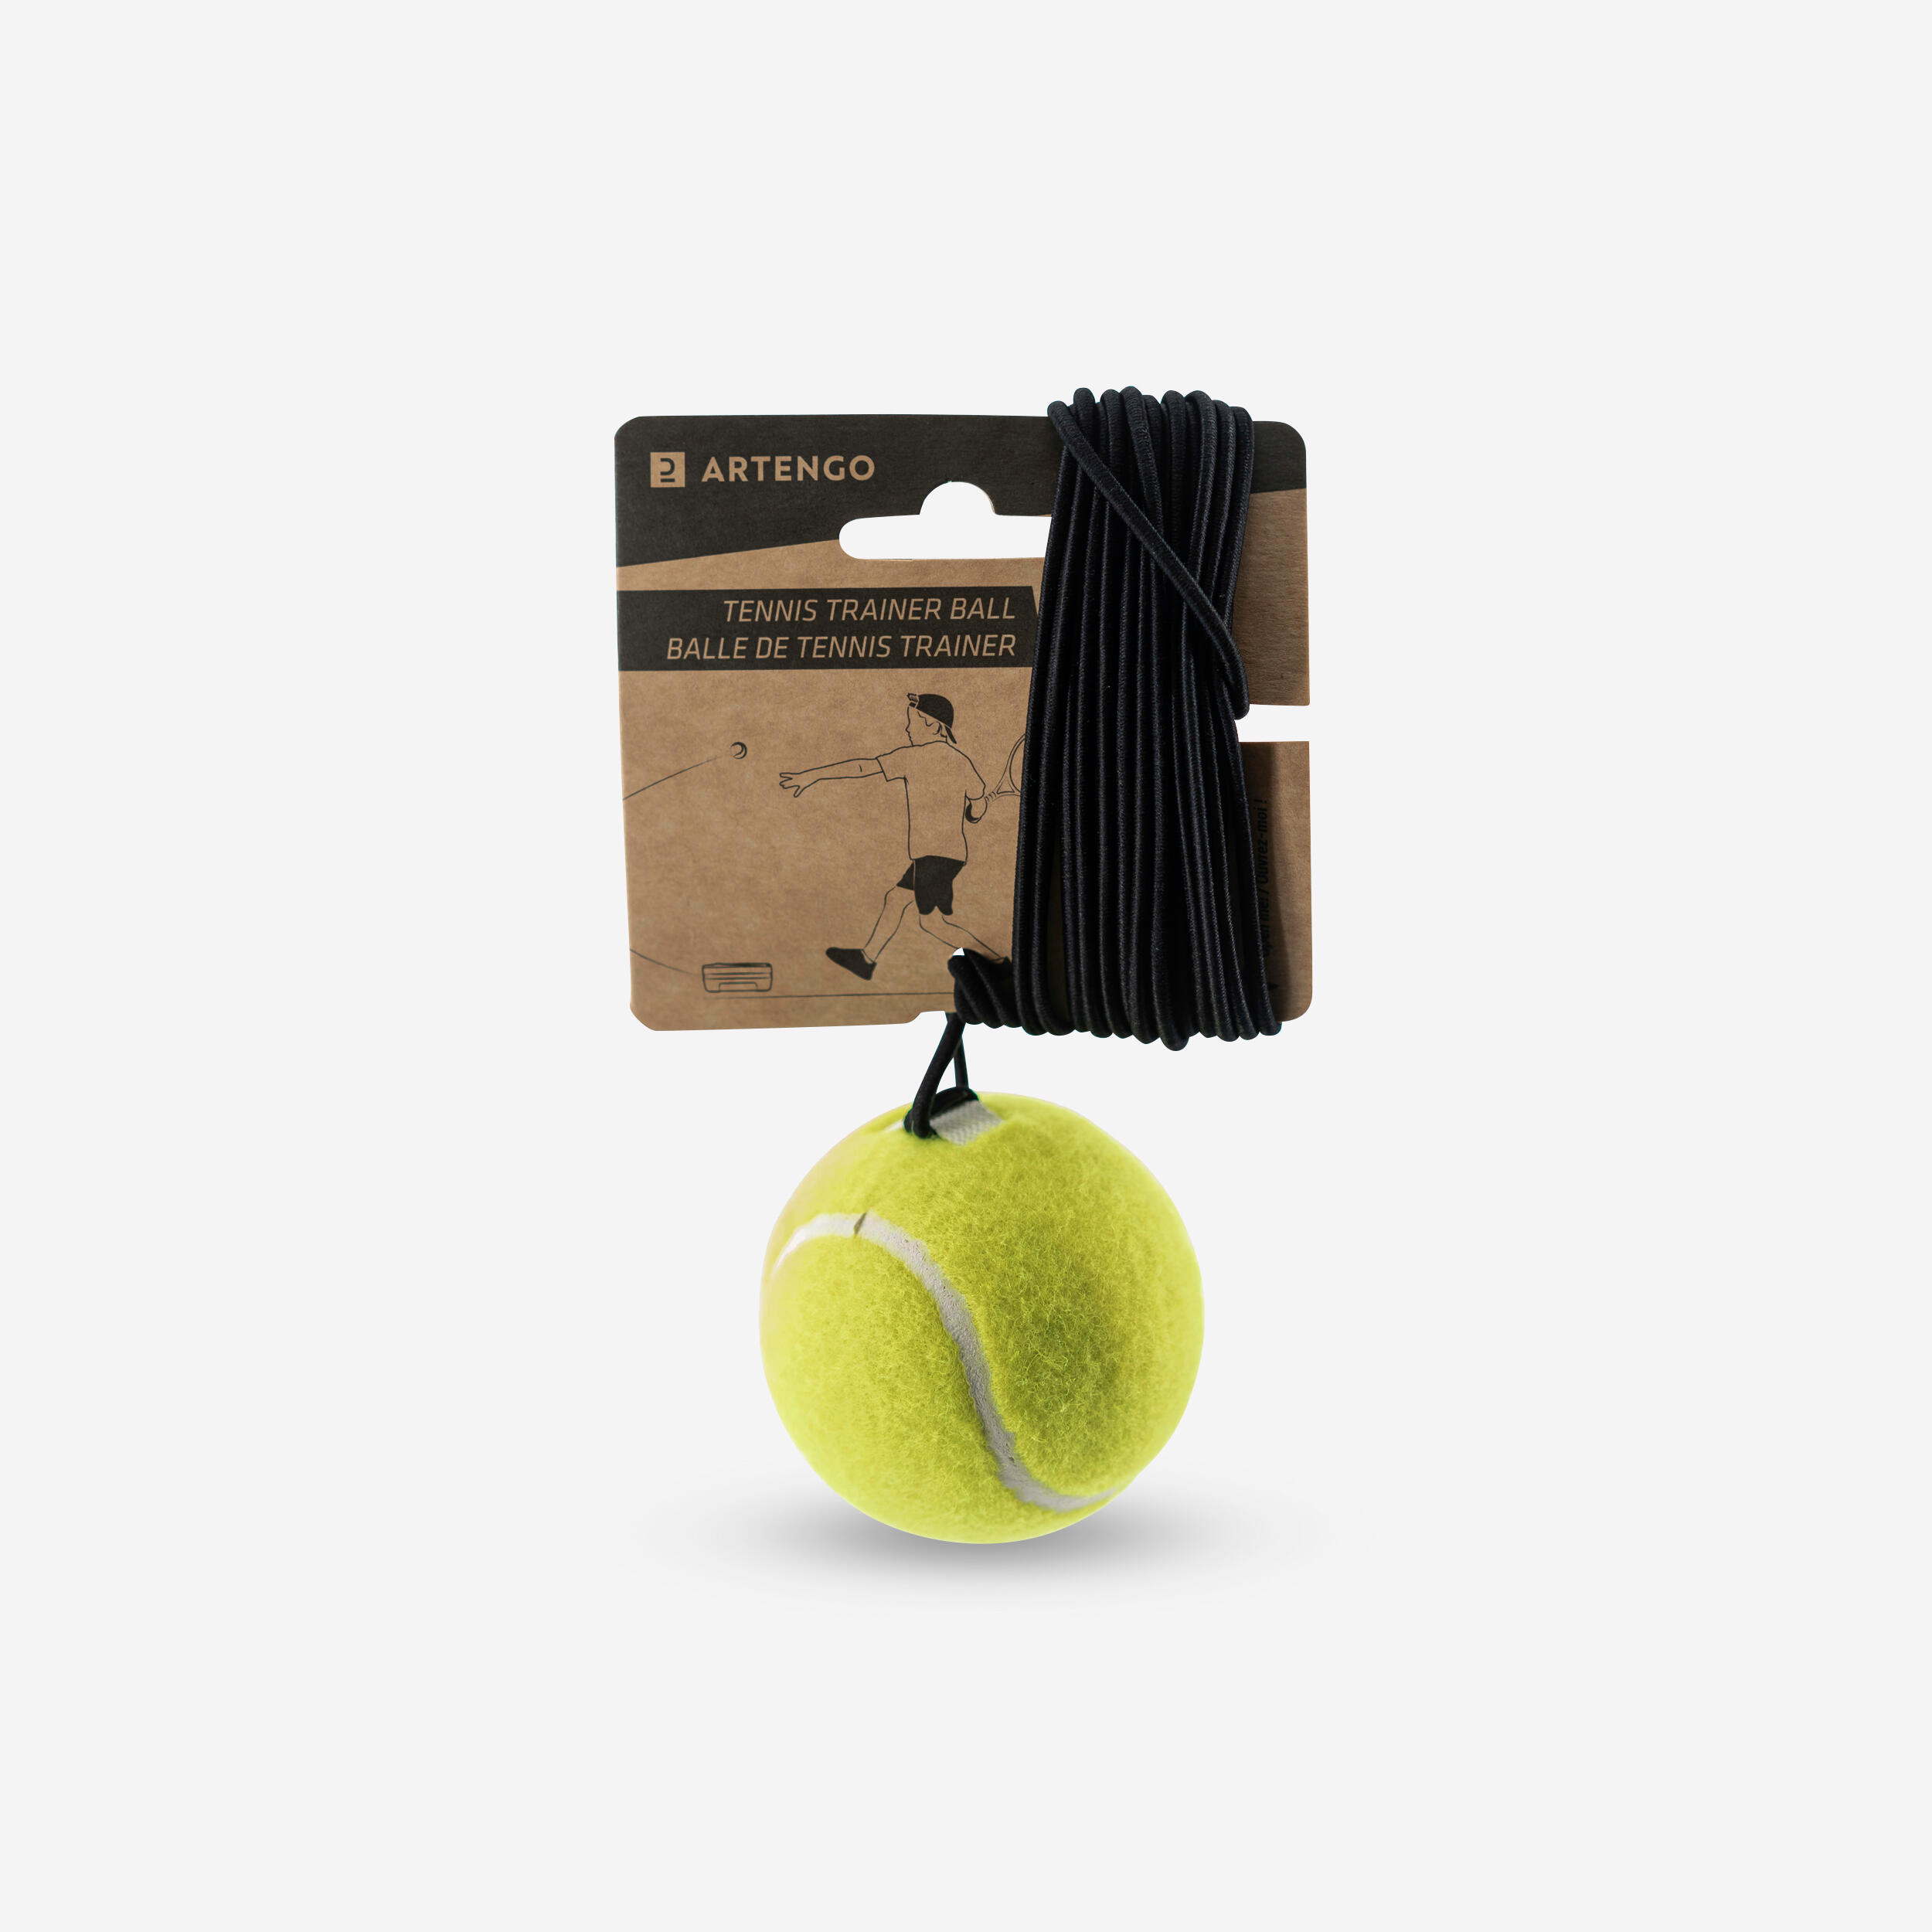 Tennis Ball and Elastic Strap For Tennis Trainer